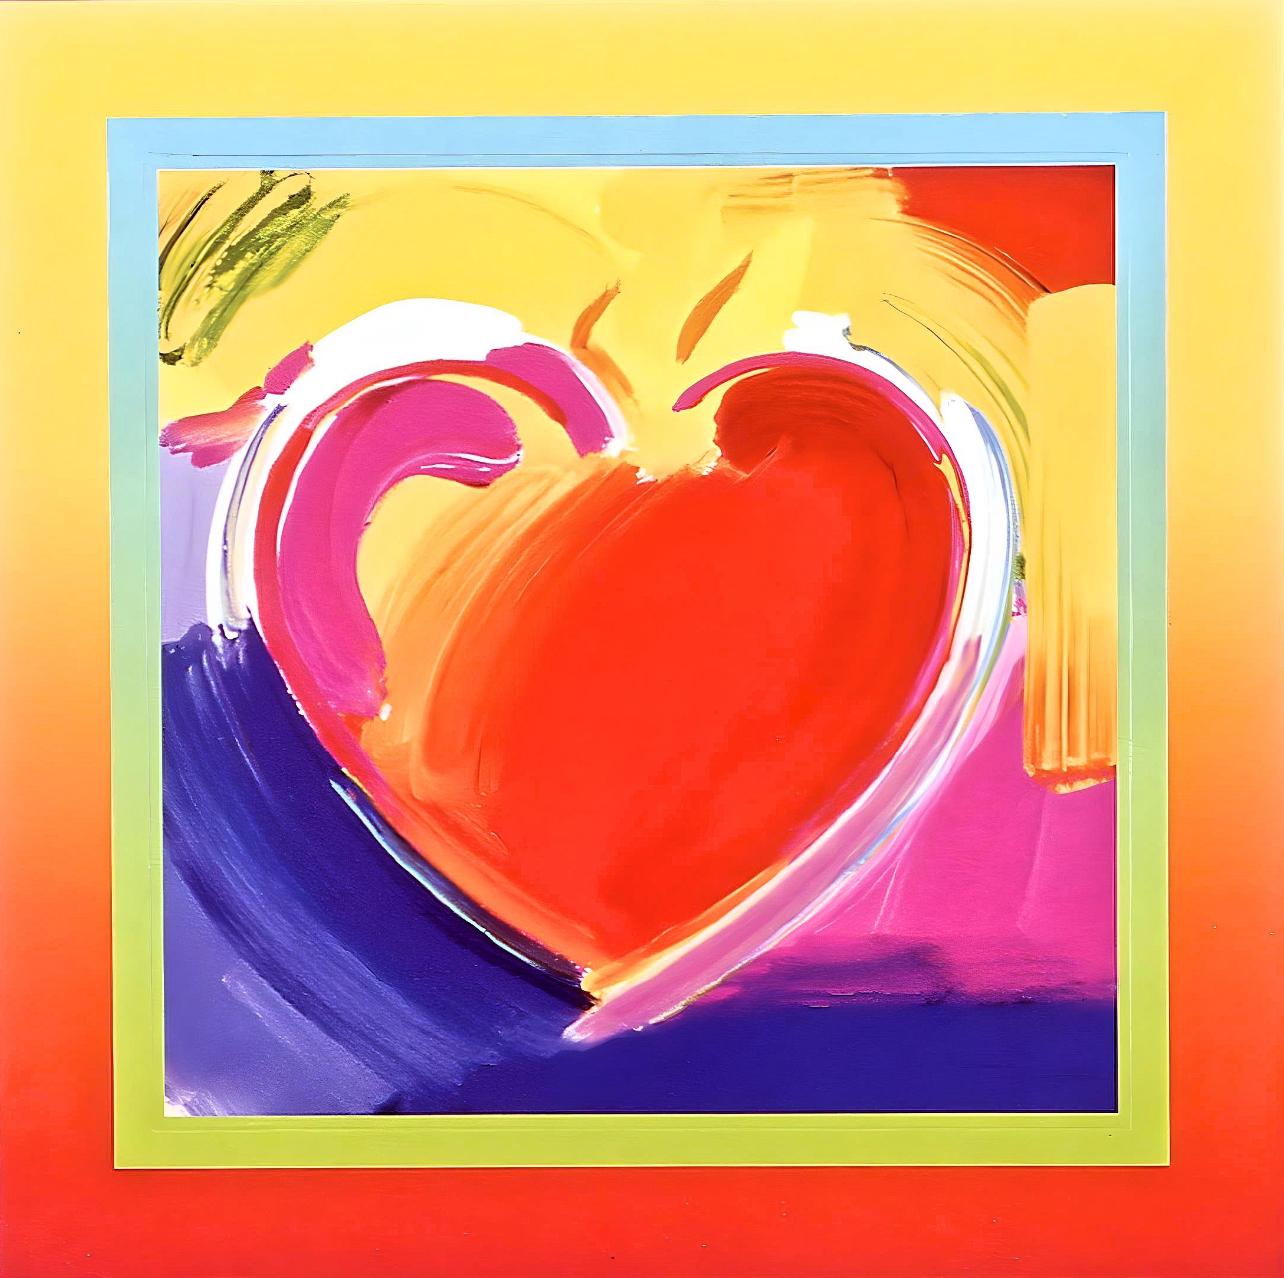 Artist: Peter Max (1937)
Title: Heart on Blends
Year: 2005
Edition: 500/500, plus proofs
Medium: Lithograph on Lustro Saxony paper
Size: 12.75 x 10 inches
Condition: Excellent
Inscription: Signed and numbered by the artist.
Notes: Published by Via